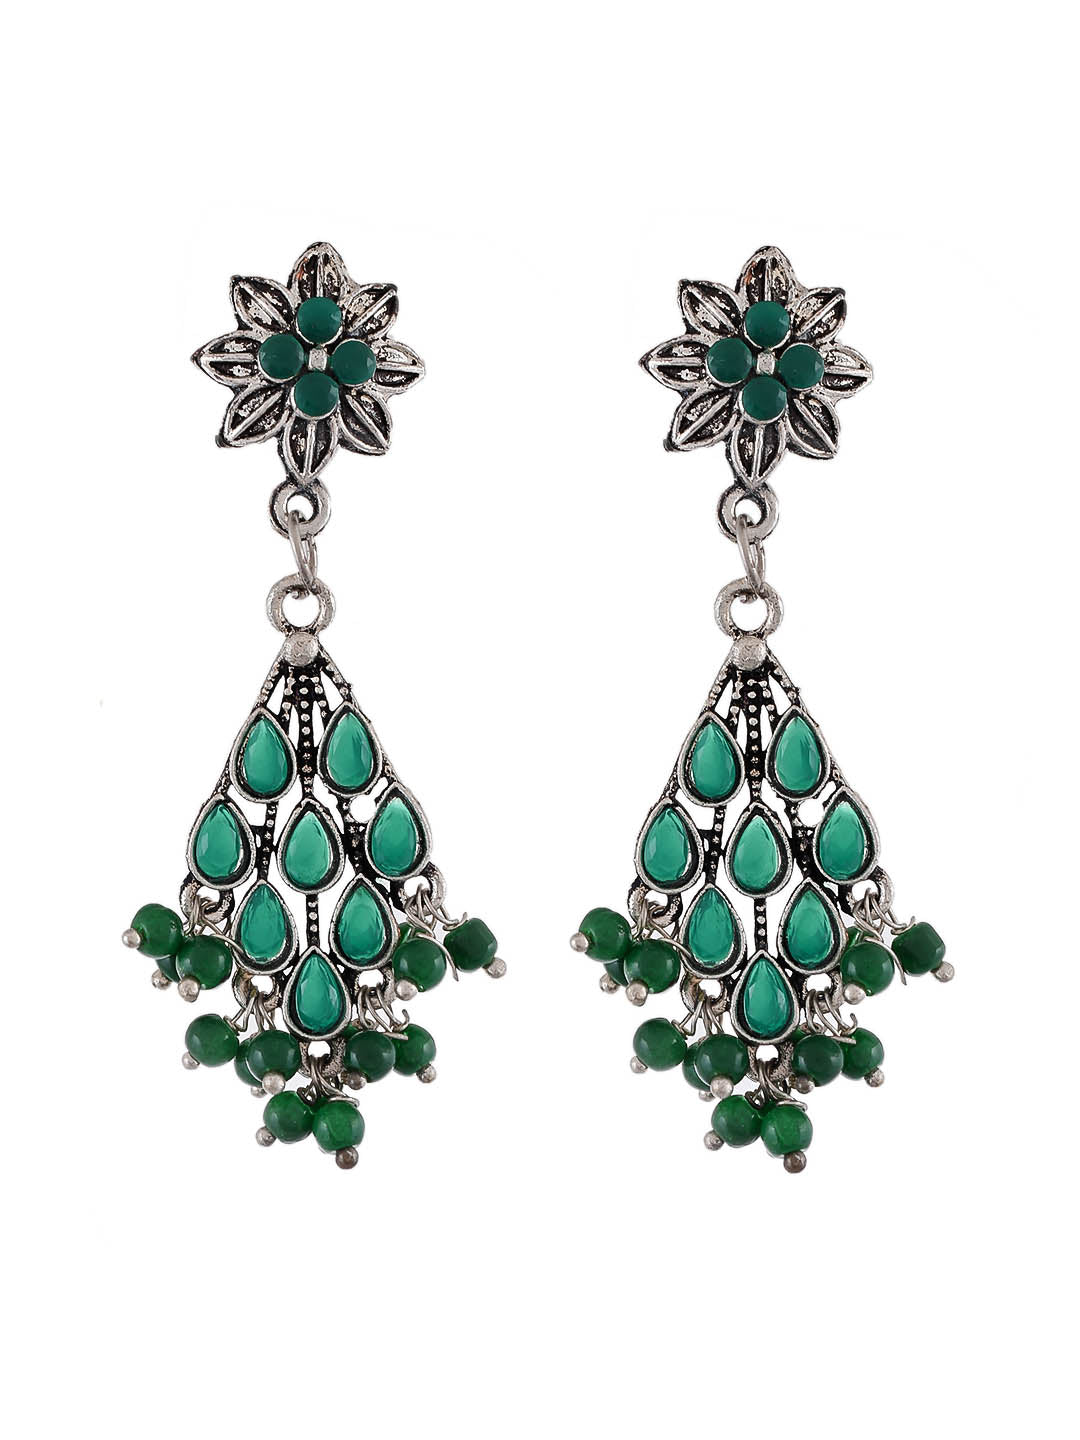 Drop Earrings With Green Beads And Oxidized Look